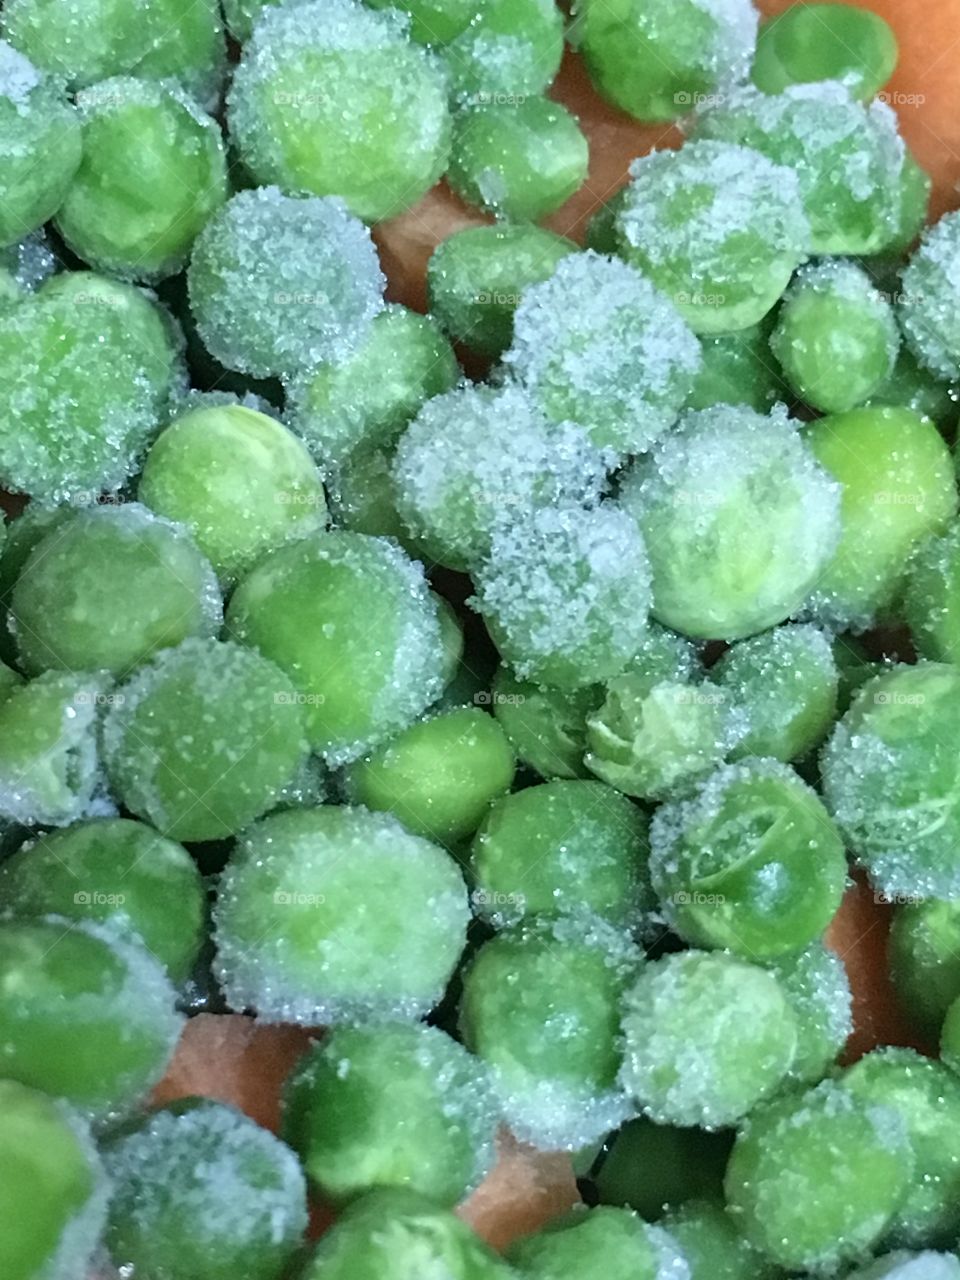 Close up view of green frozen peas with ice crystals on them in the kitchen before cooking 